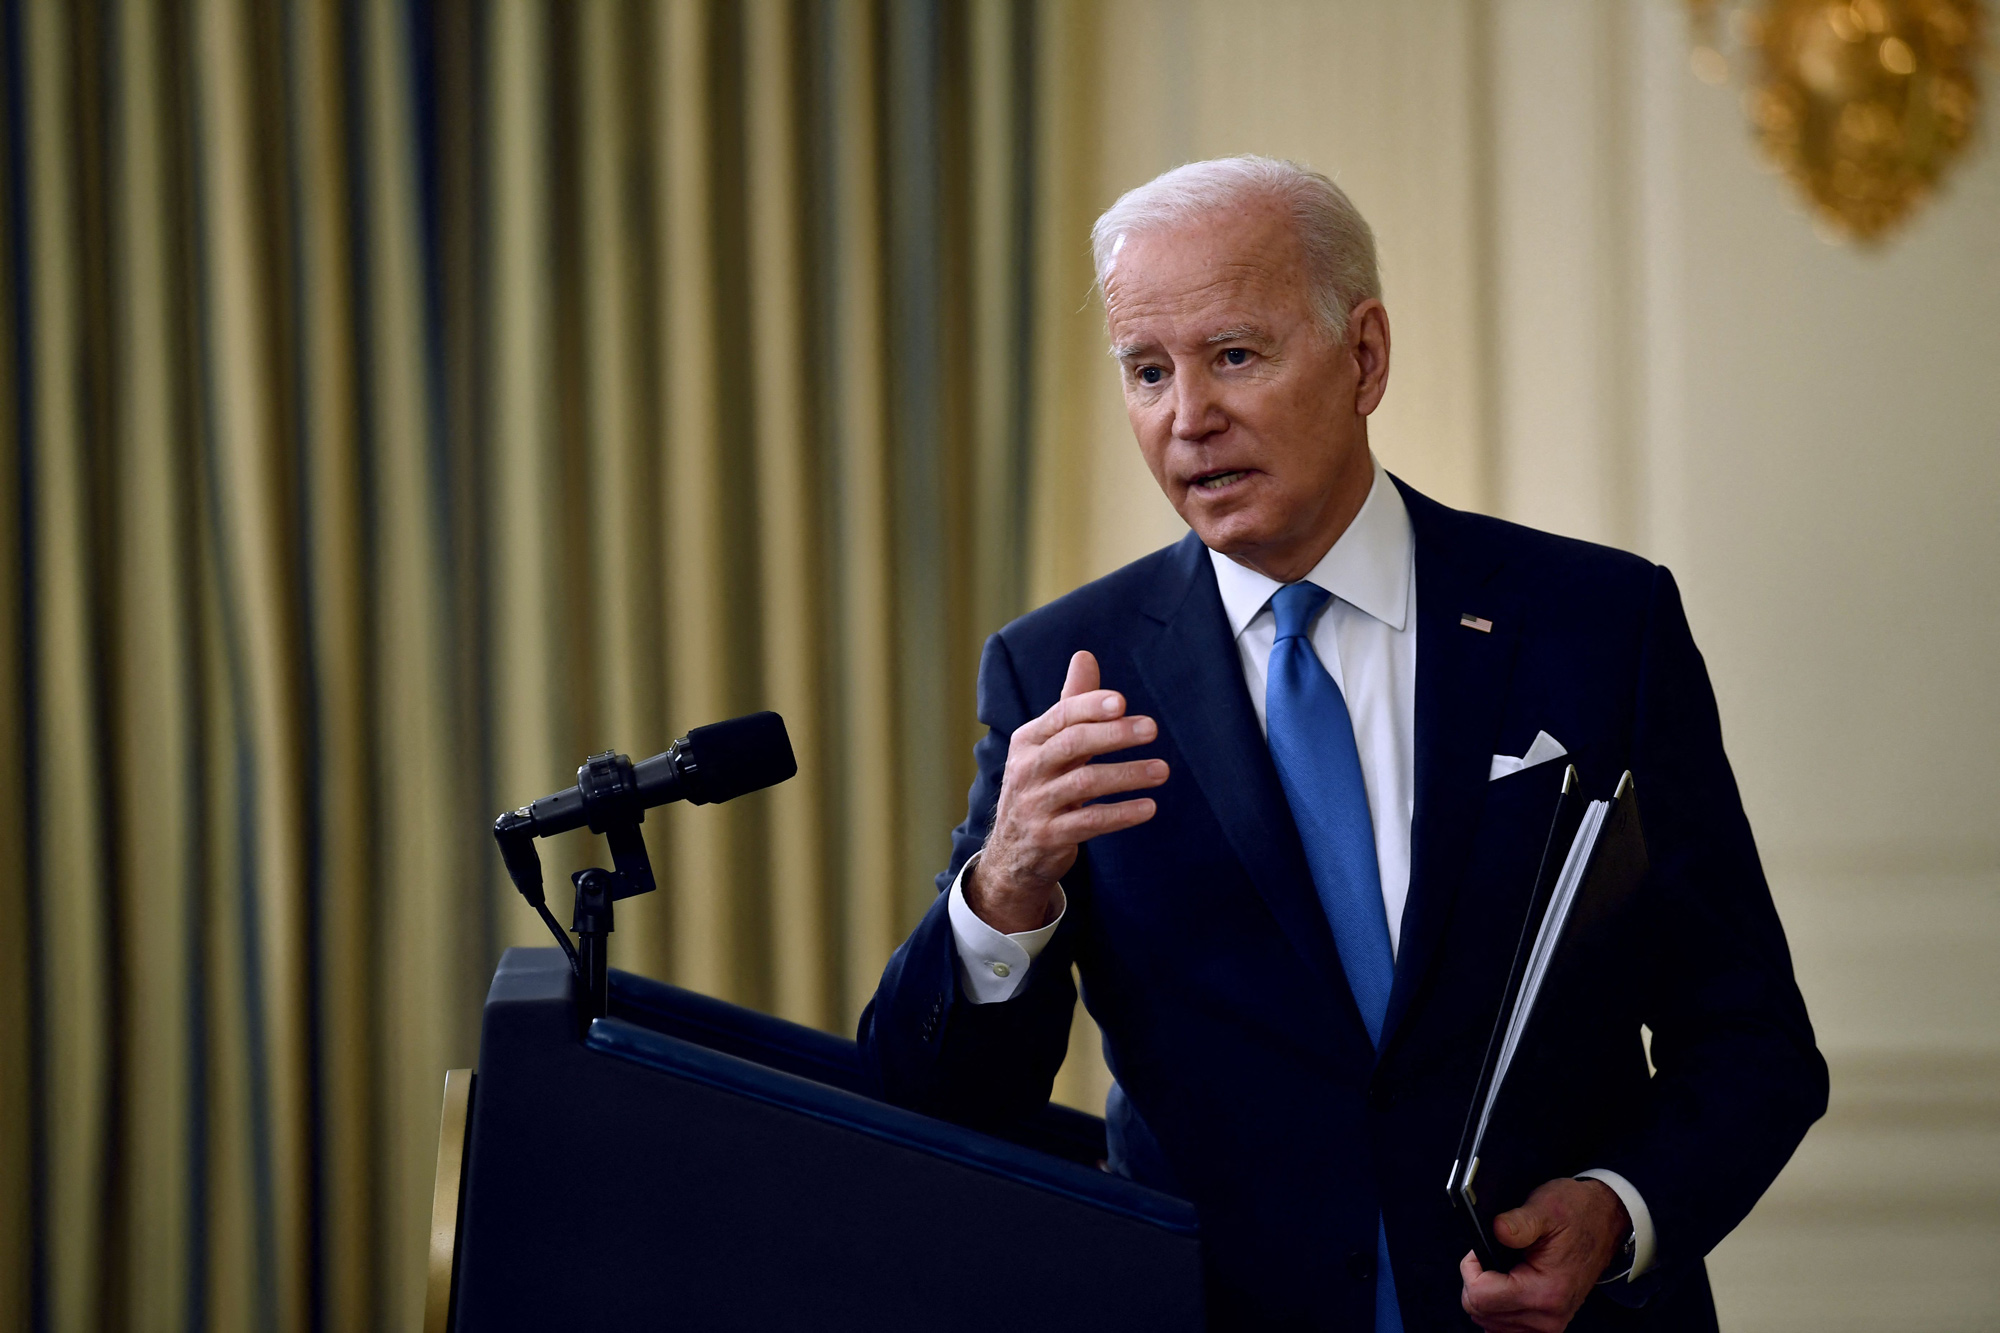 President Joe Biden answers speaks in the State Dining Room of the White House in Washington, DC, on December 21.